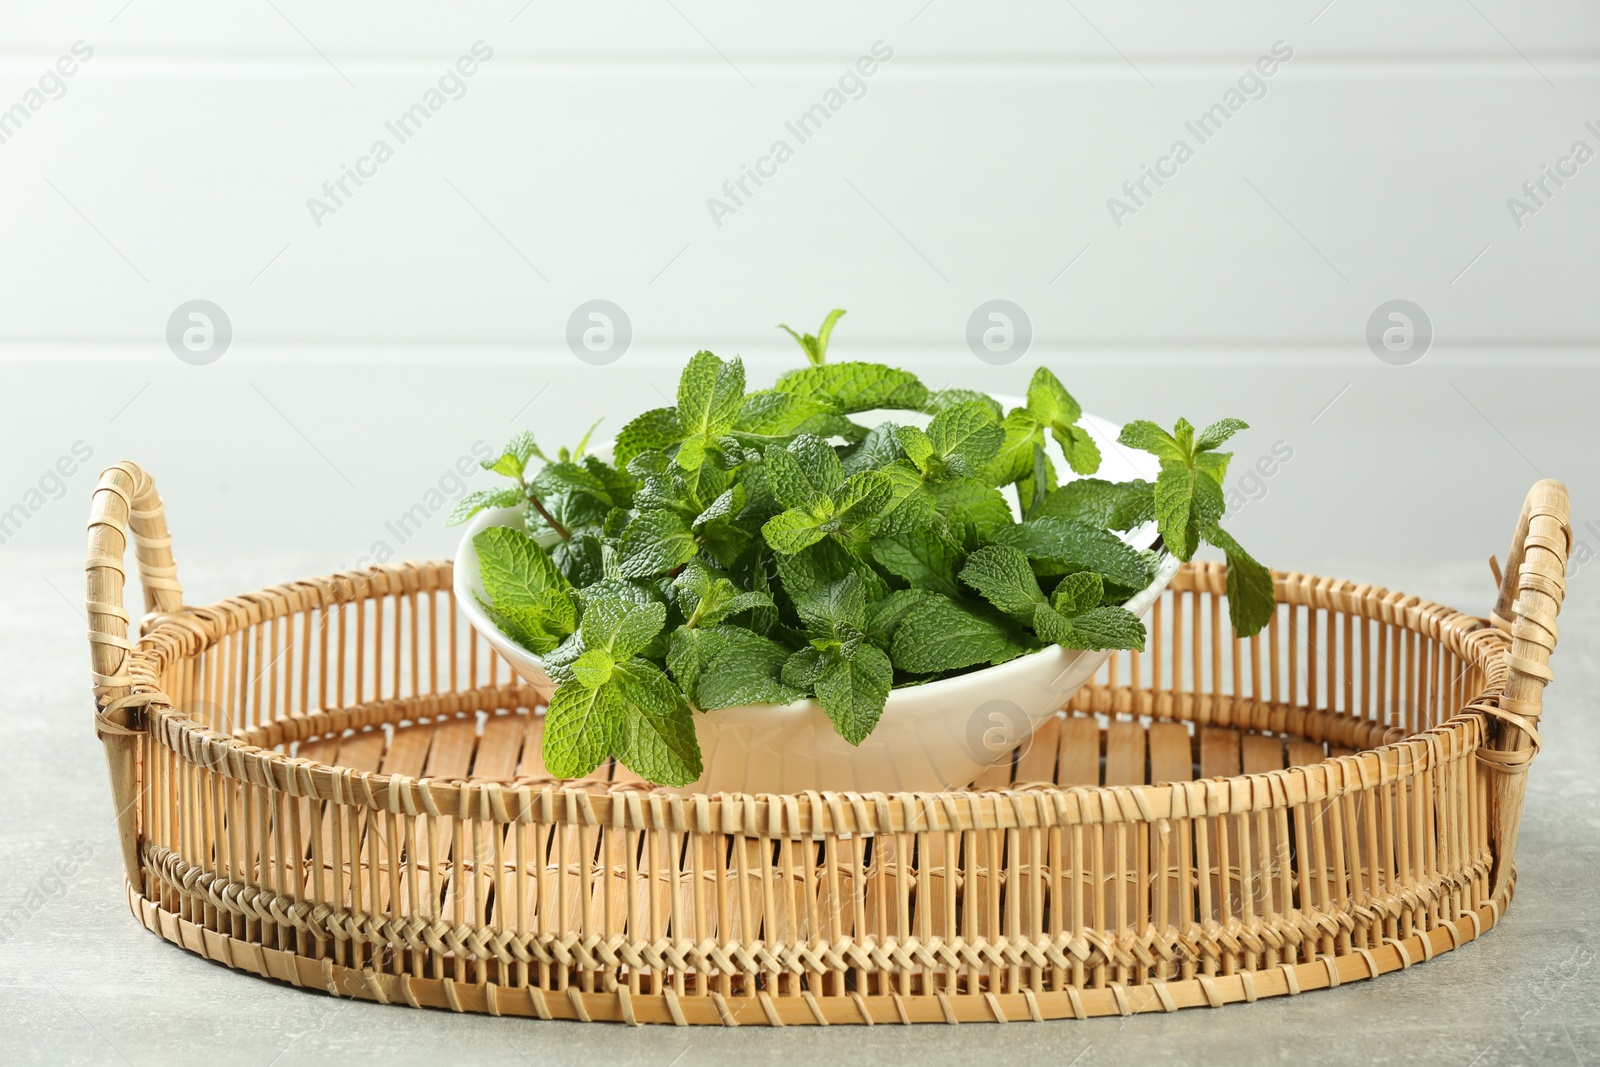 Photo of Wicker tray with bowl of fresh green mint leaves on grey table